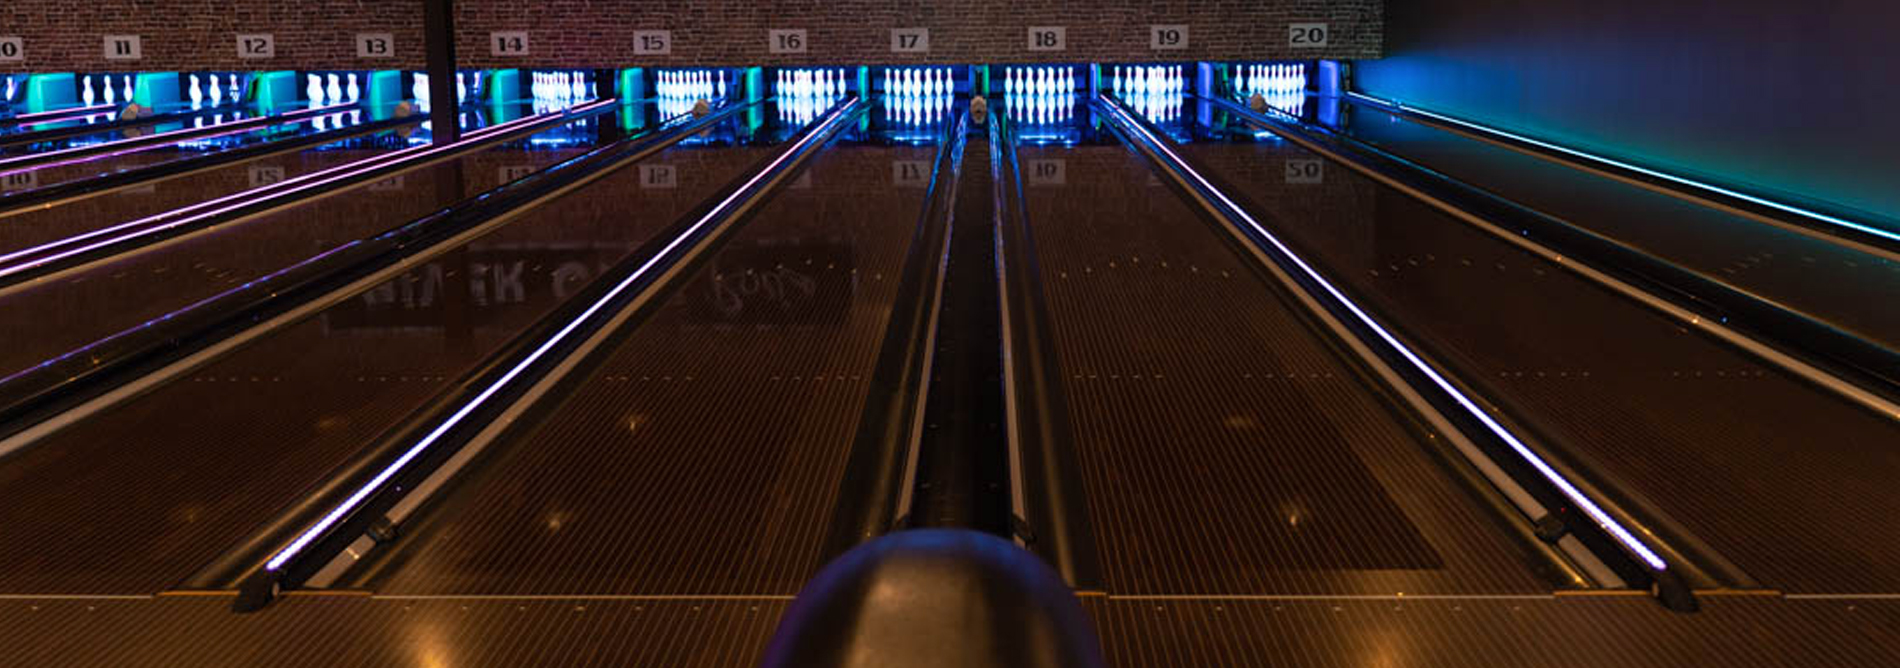 Bowling-QubicaAMF-CAPPING-LIGHTS-Capping-Illumination-built-for-Bowling-banner.jpg